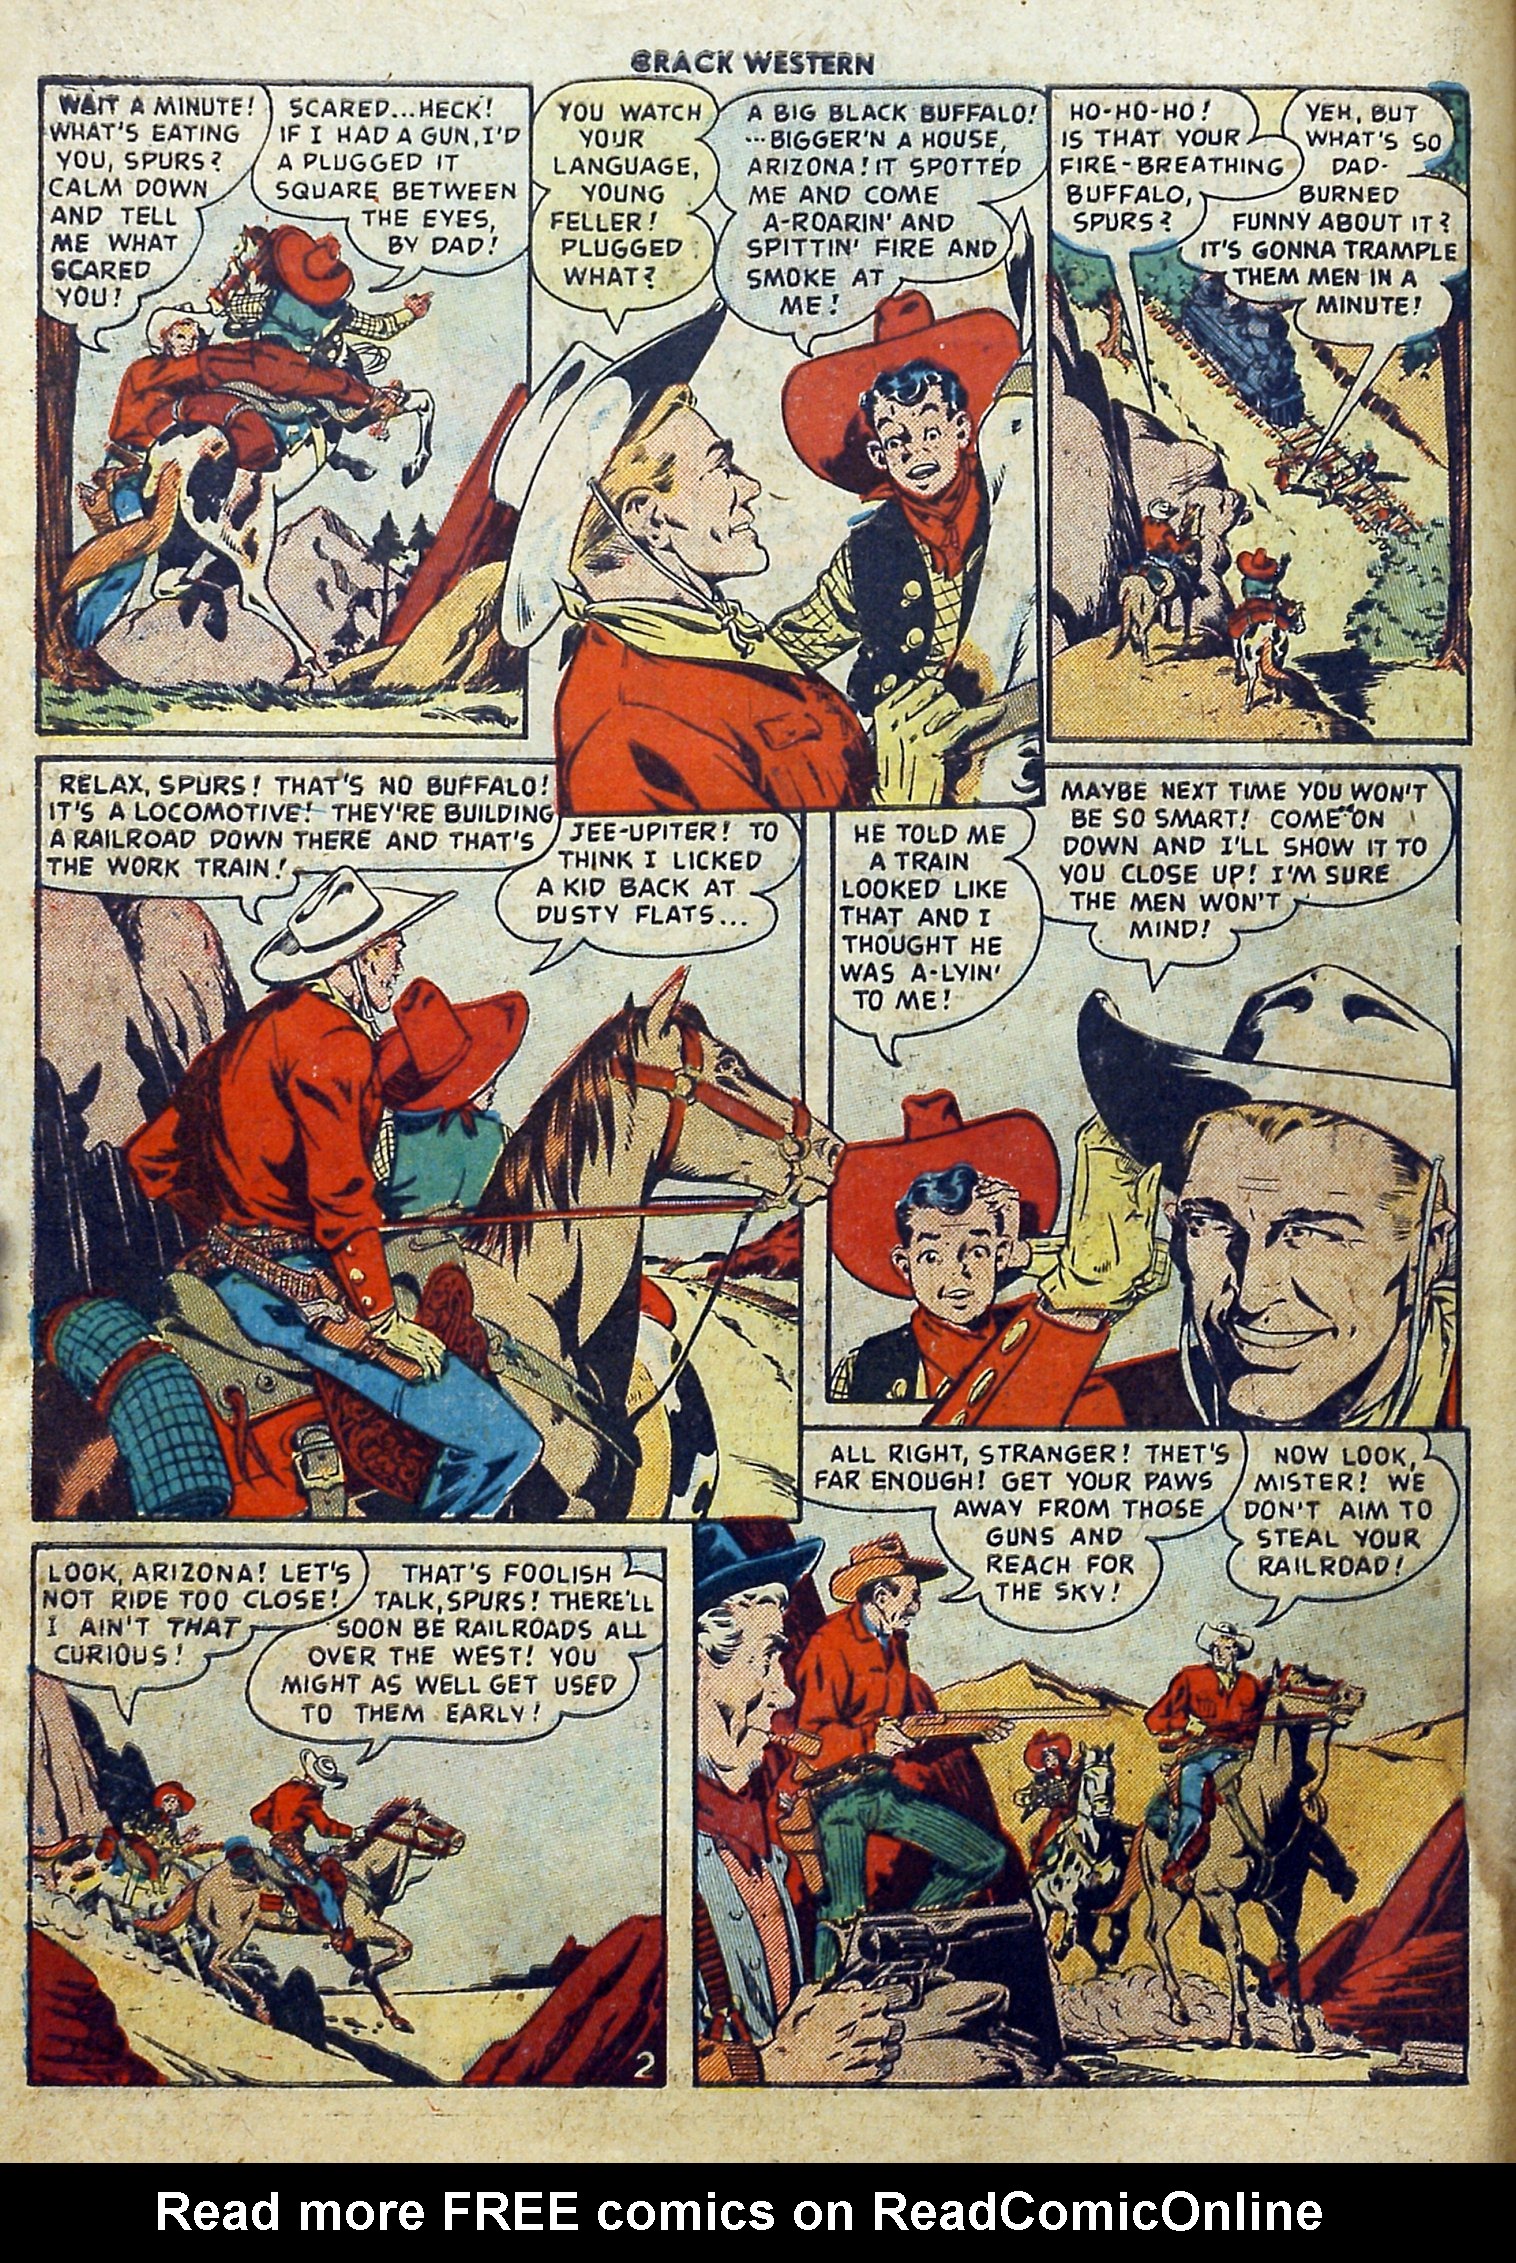 Read online Crack Western comic -  Issue #63 - 4